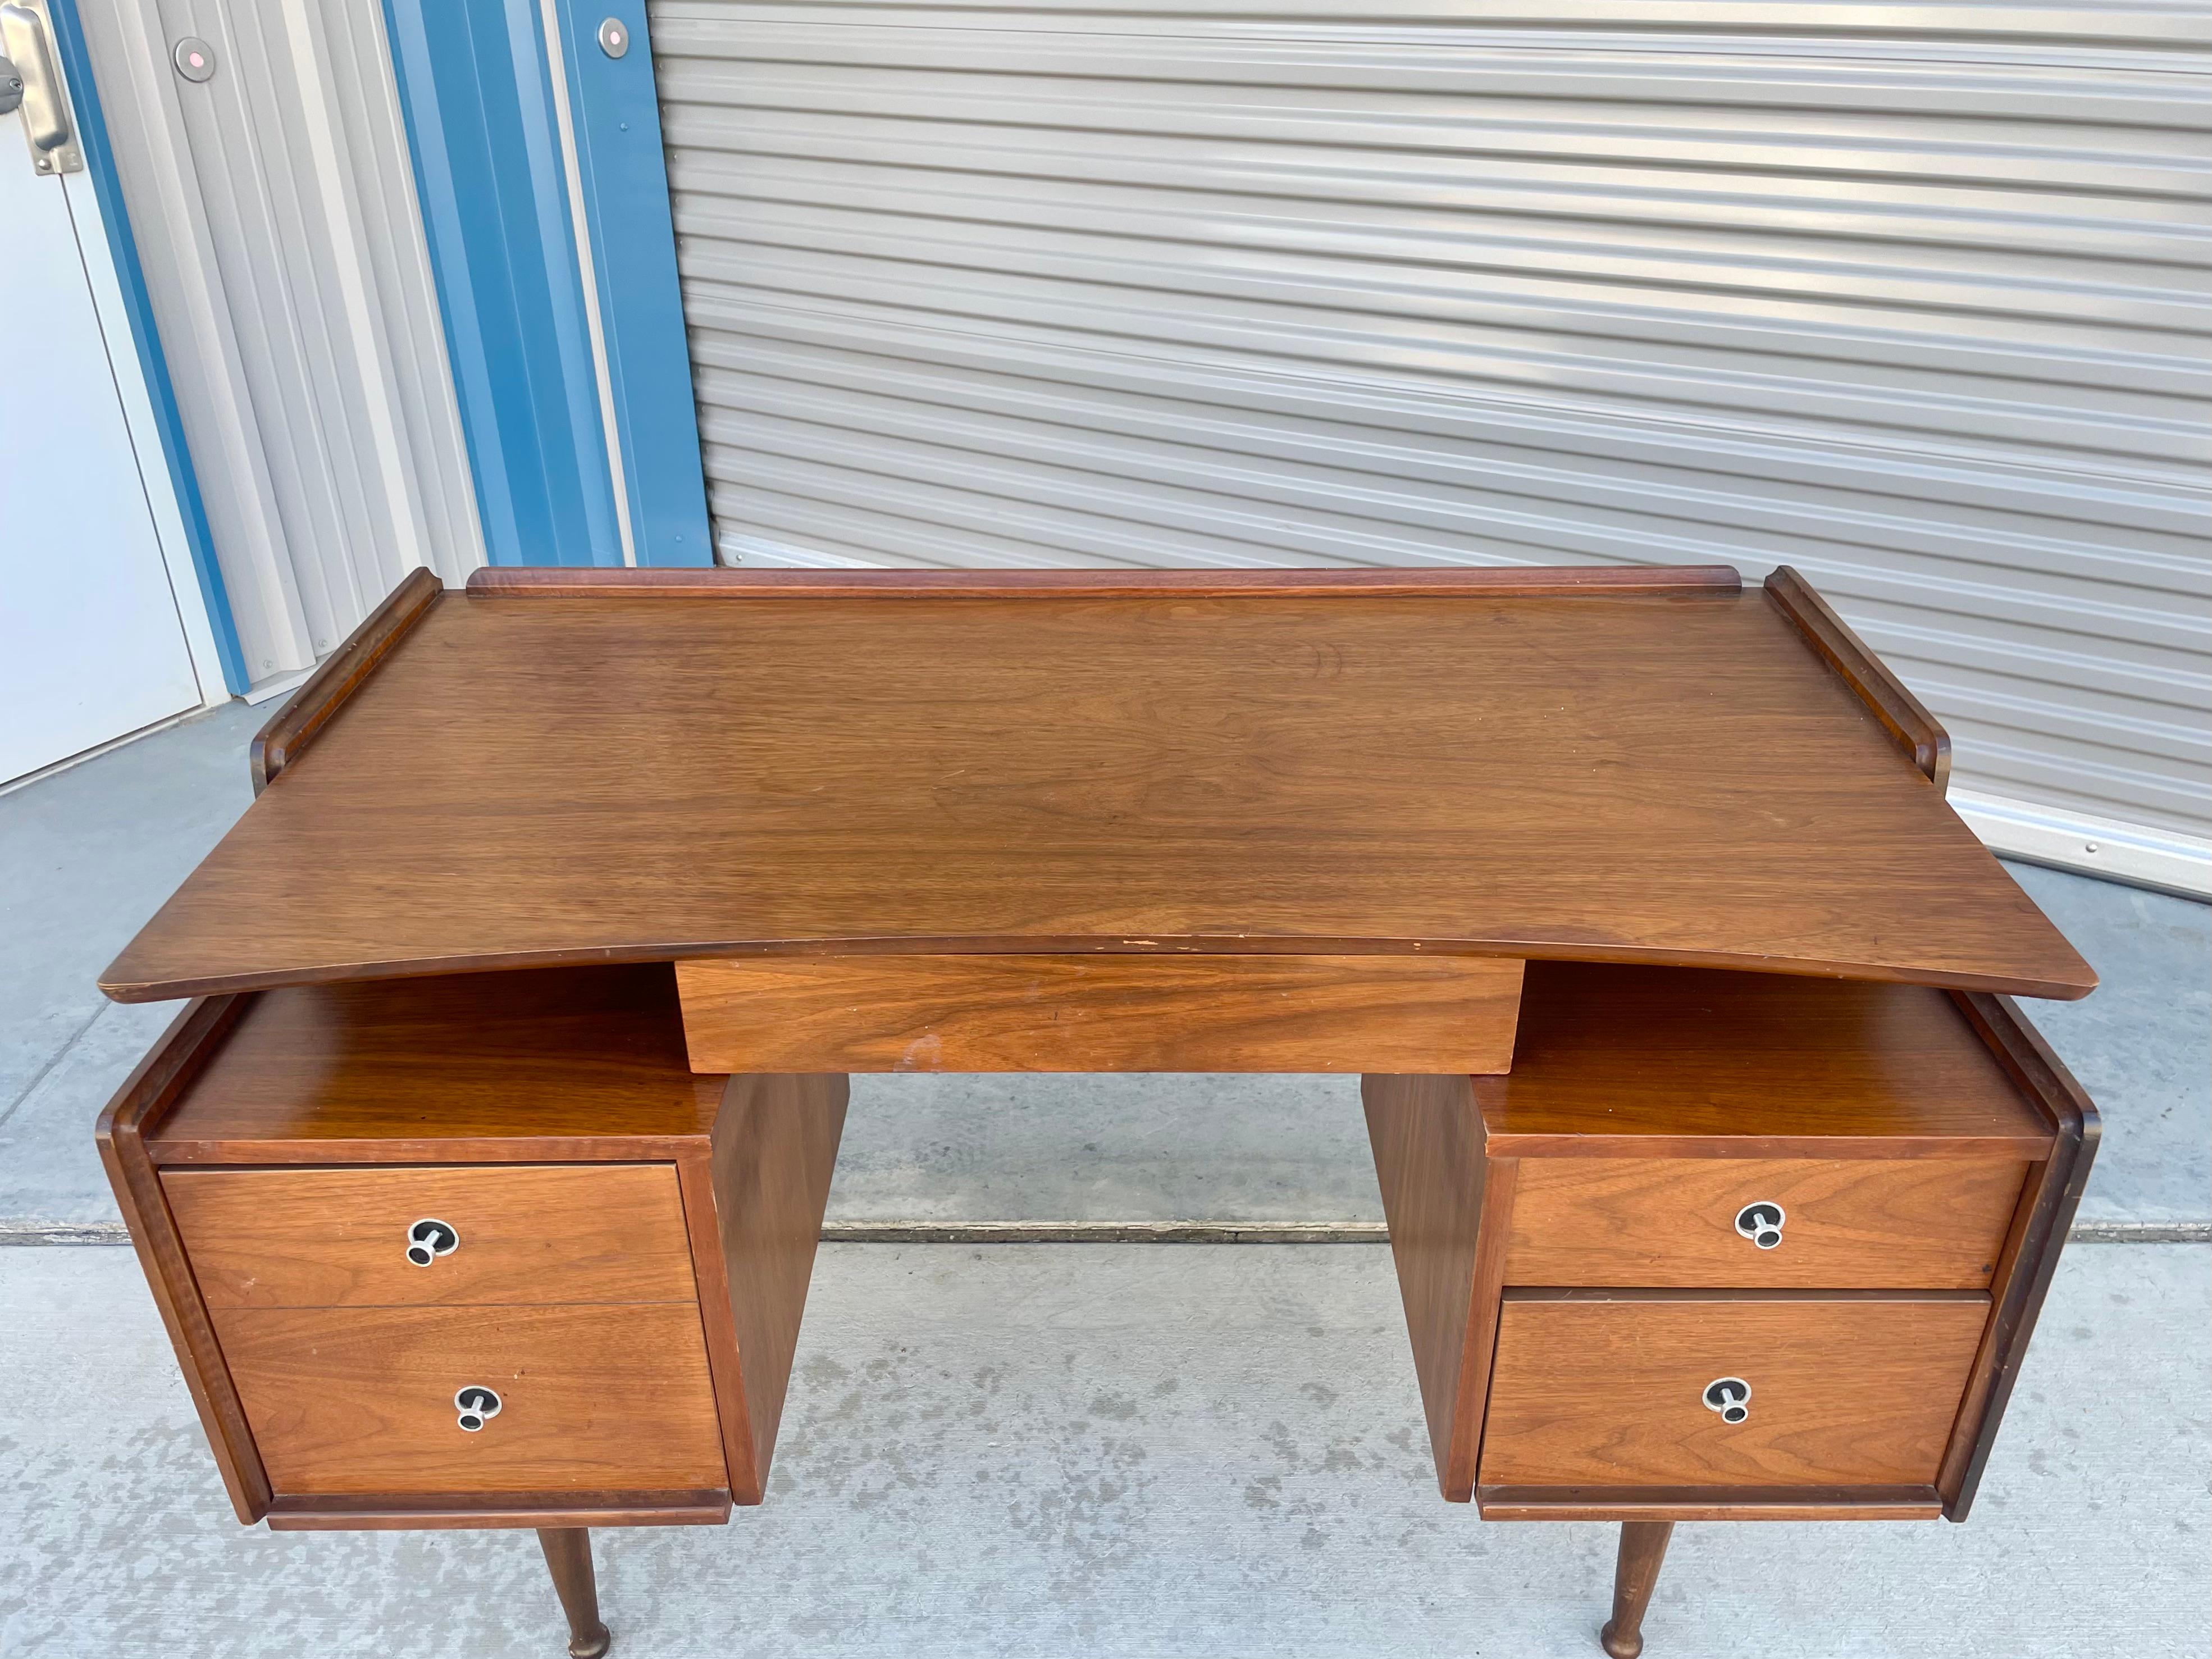 Mid-century walnut desk designed and manufactured by Hooker in the United States circa 1960s. This stunning desk features a walnut frame. The desk also comes with two pull-out drawers and one filing cabinet, giving you plenty of storage space for